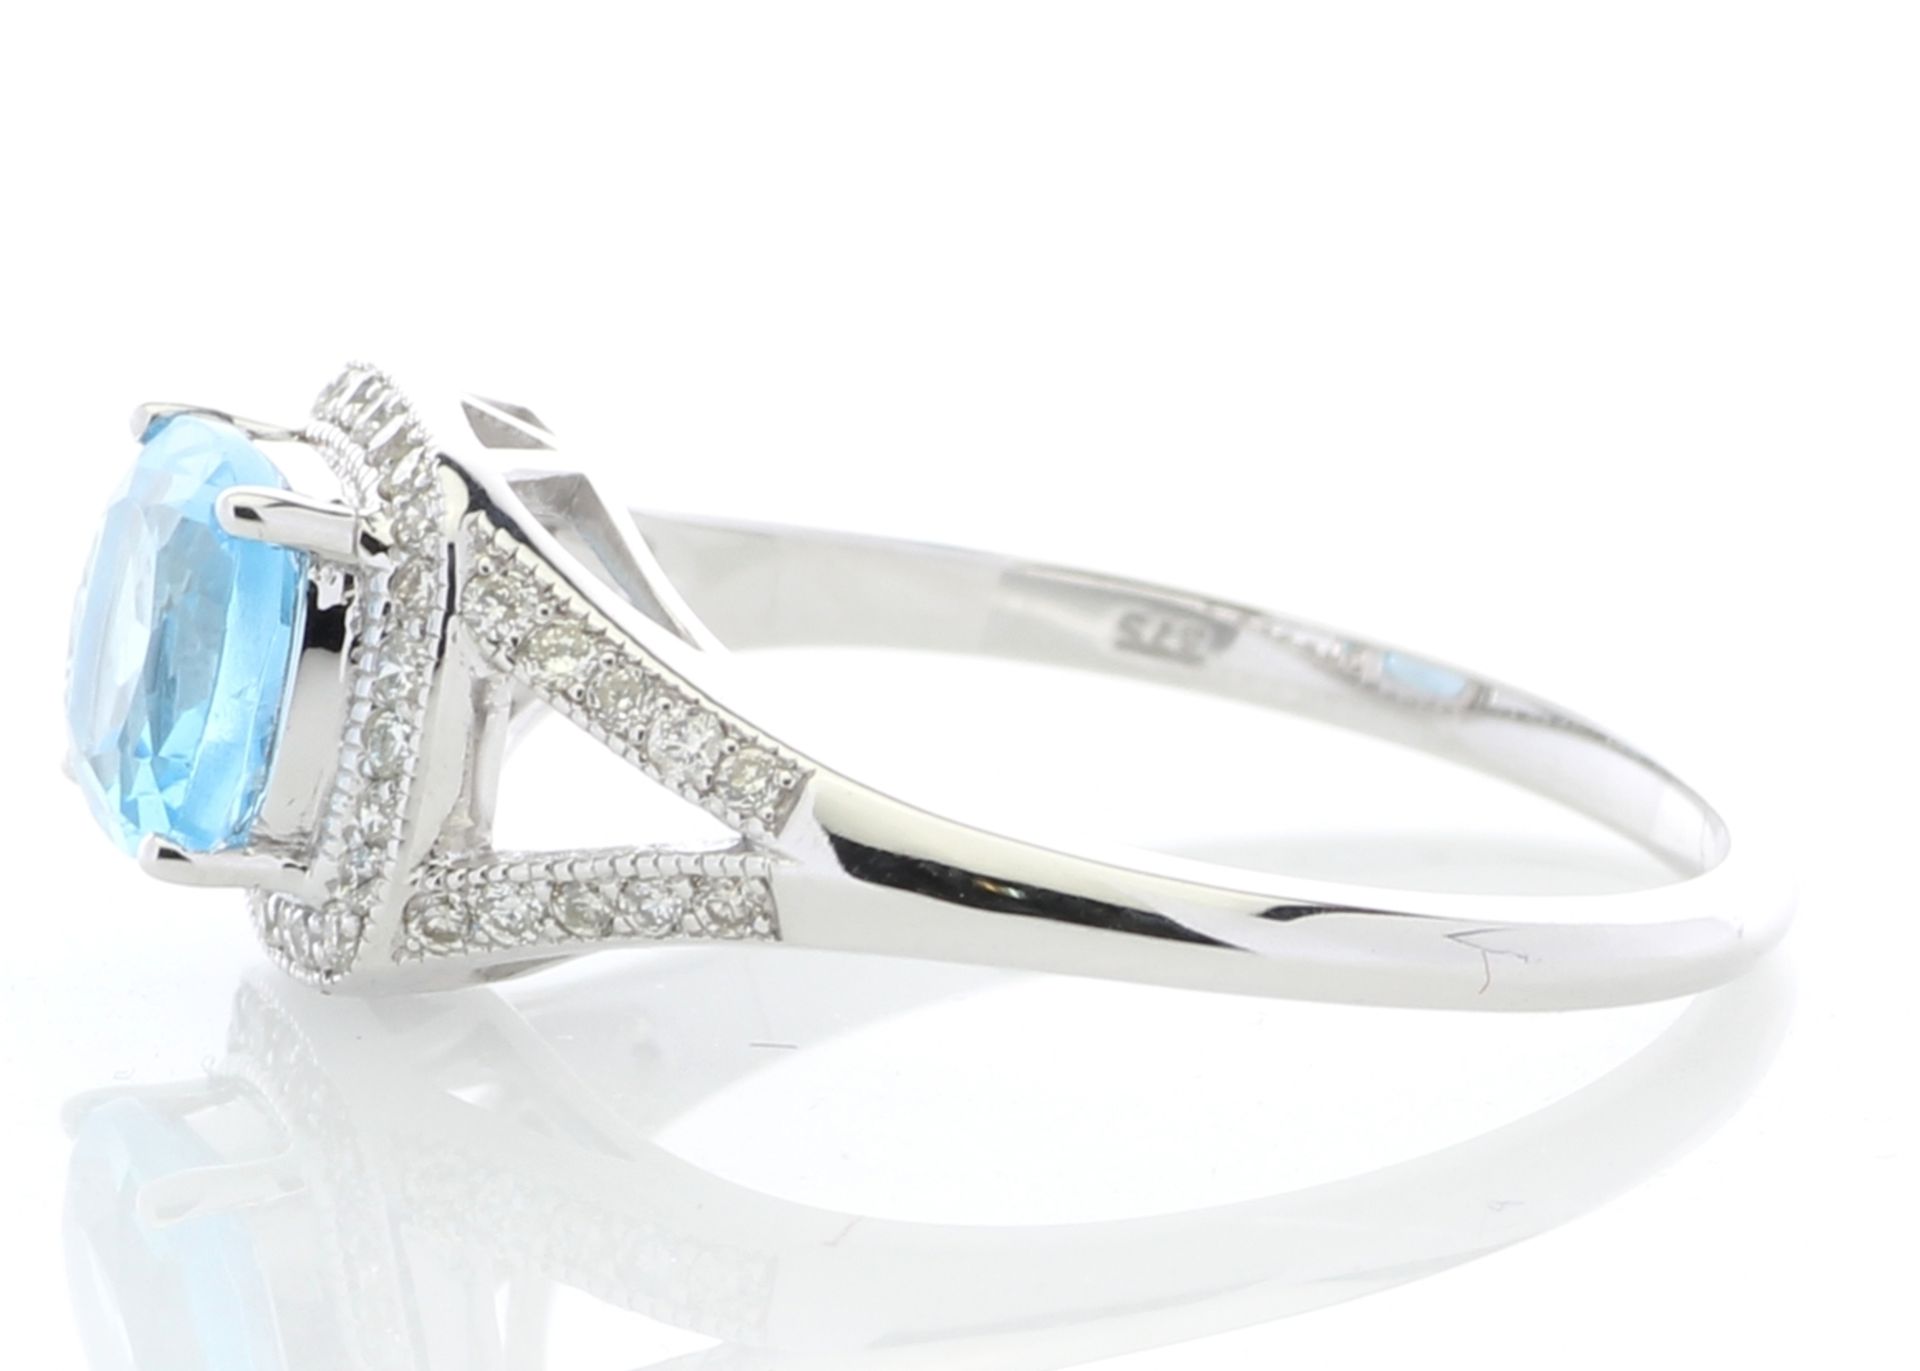 9ct White Gold Blue Topaz And Diamond Ring 0.22 Carats - Valued by GIE £2,695.00 - 9ct White Gold - Image 3 of 5